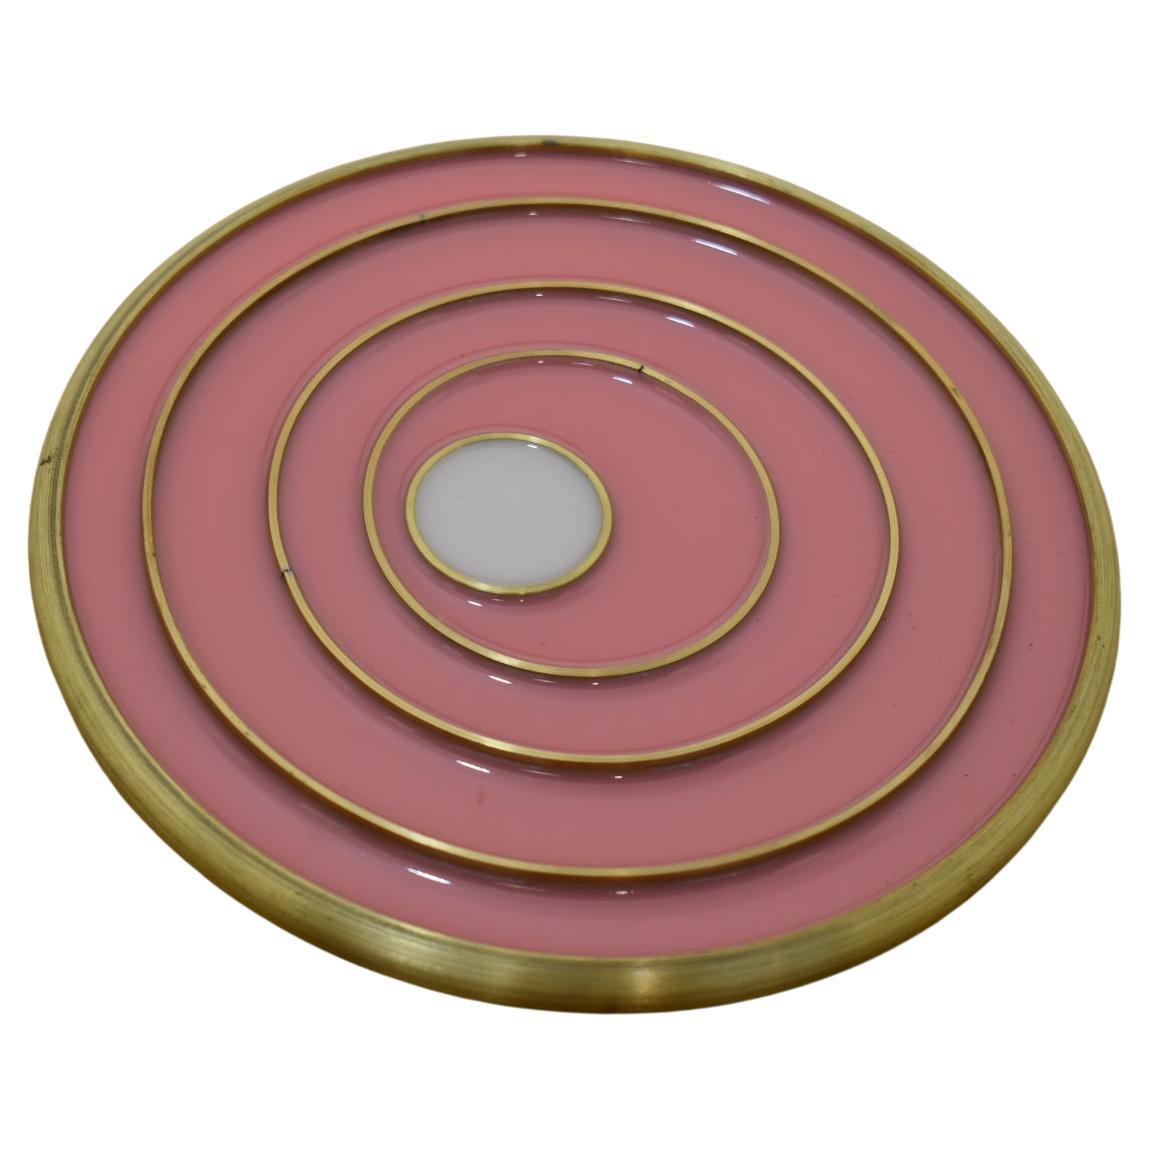 8" Brass Spun Trivet with Color Pop of Pink and White by Daughter Mfg